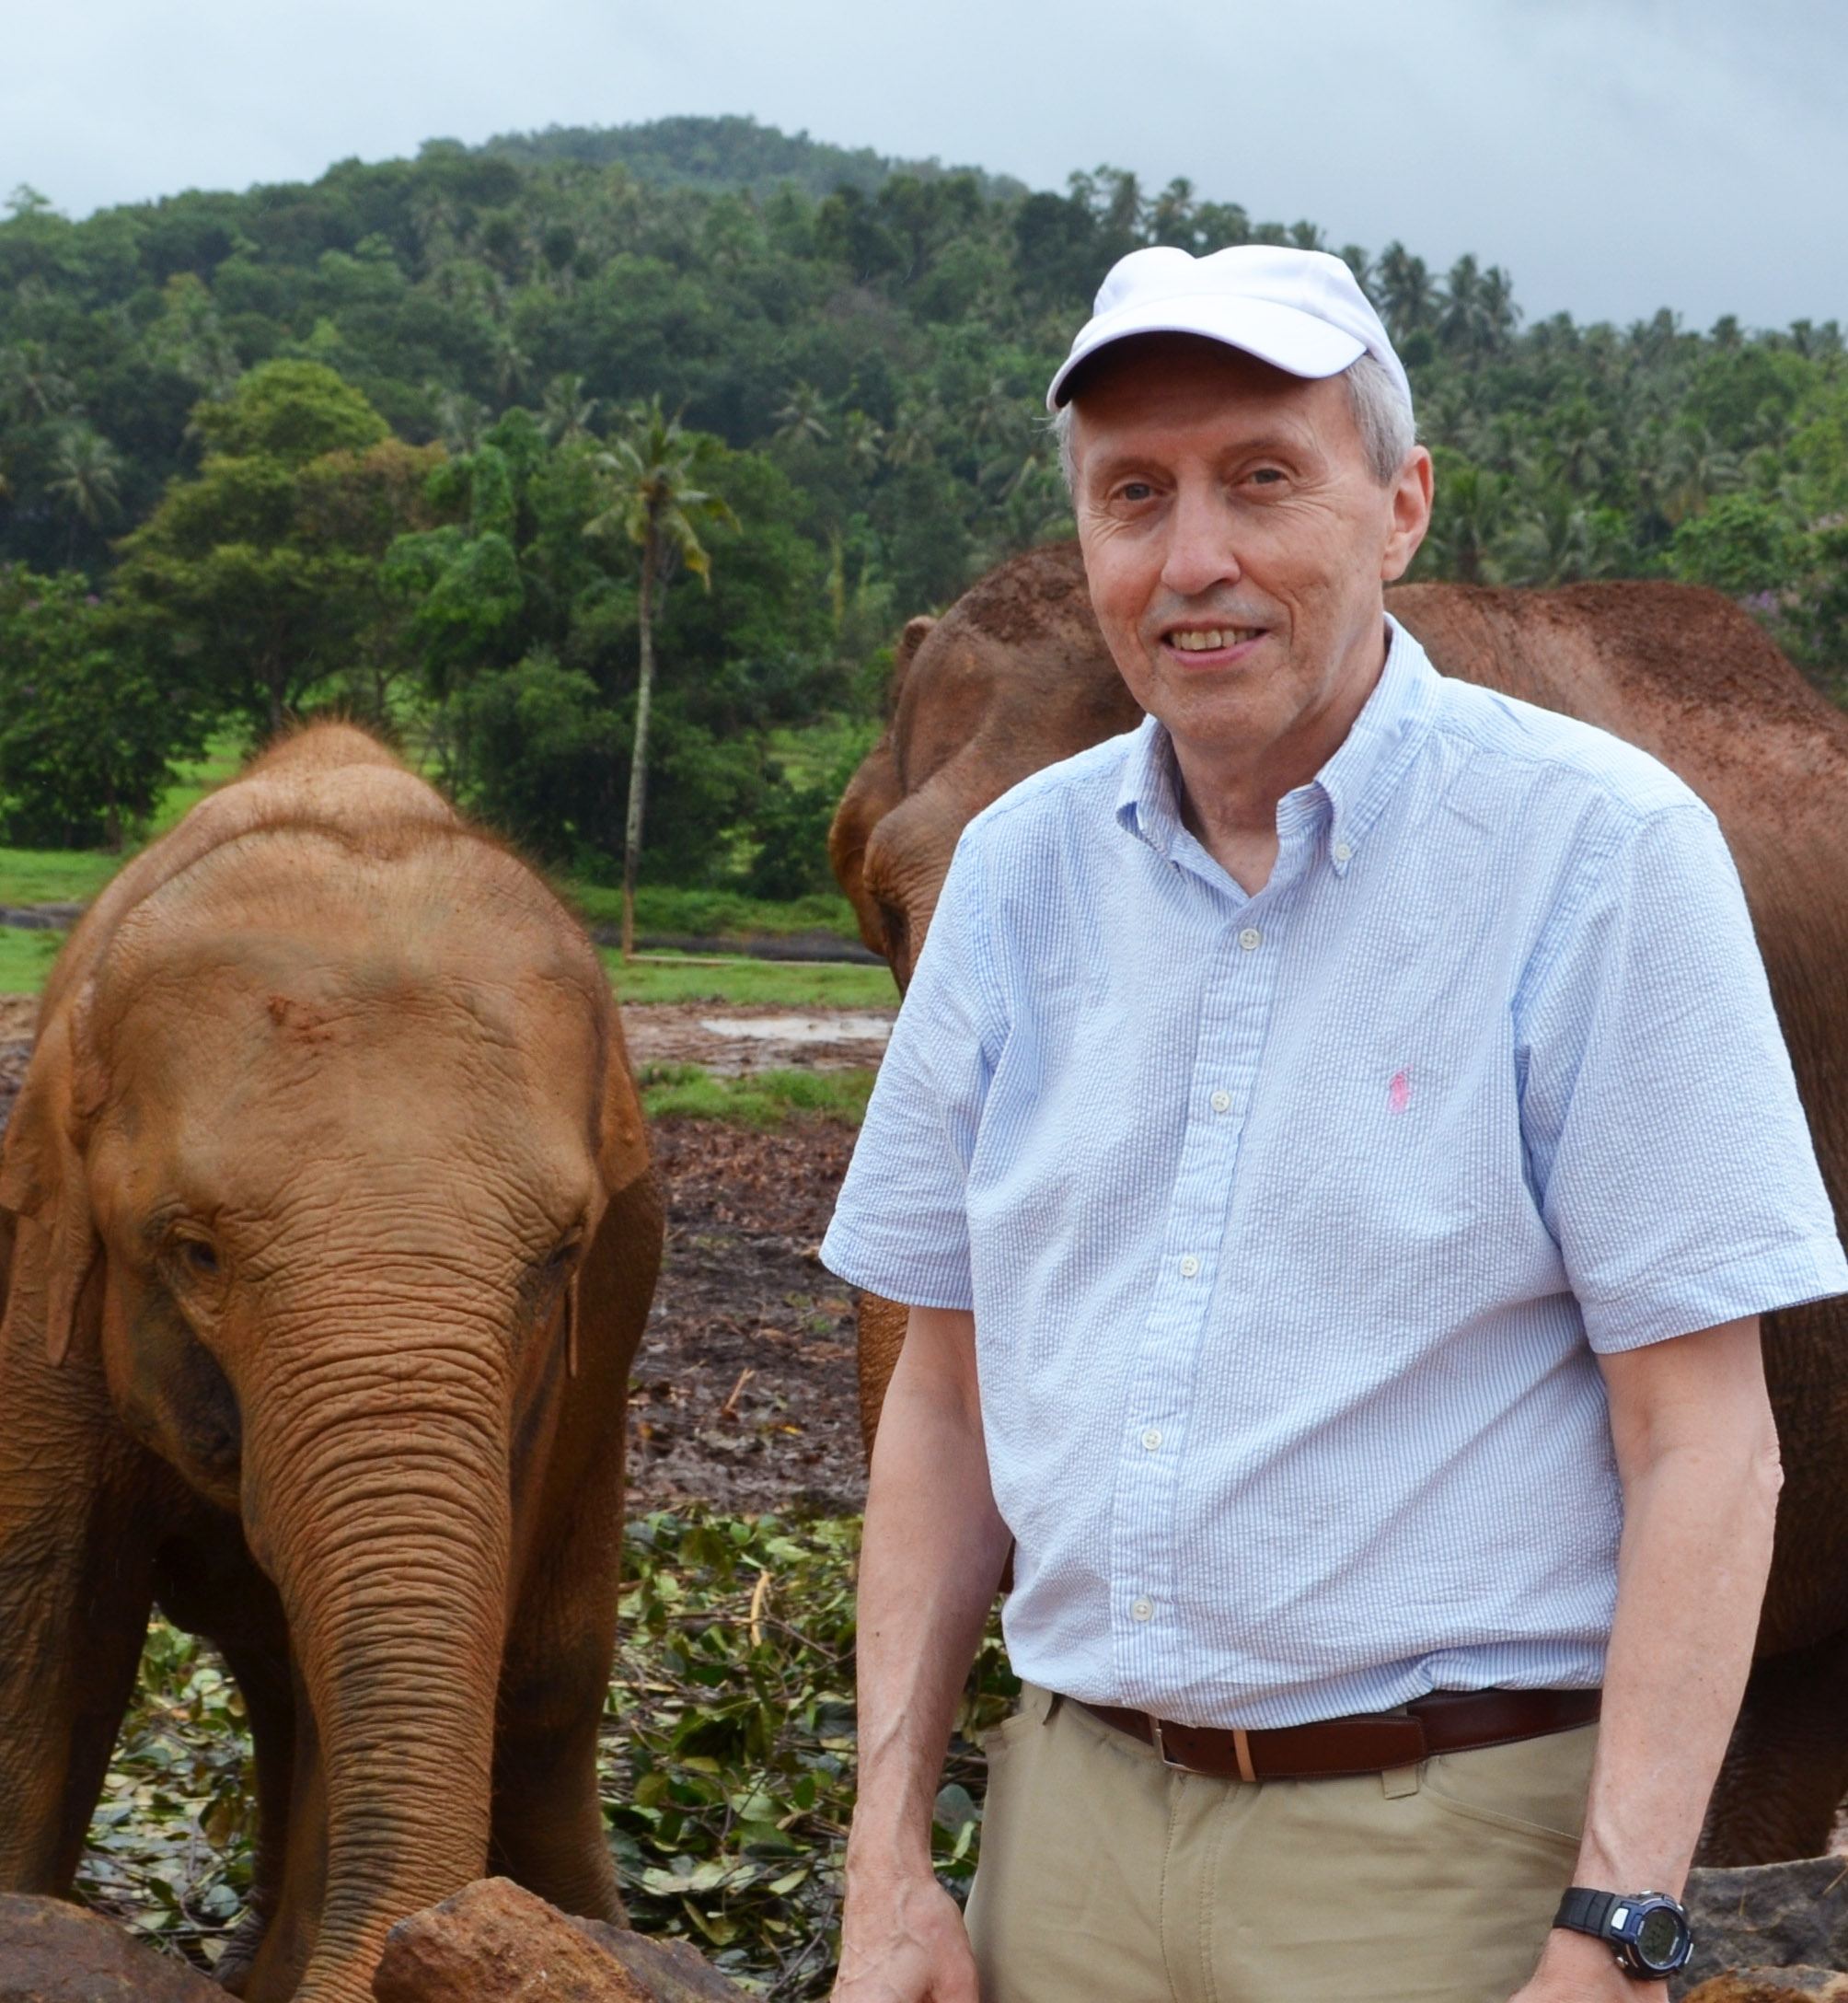 George Hornberger standing in a field with elephants, trees, and hills in the background